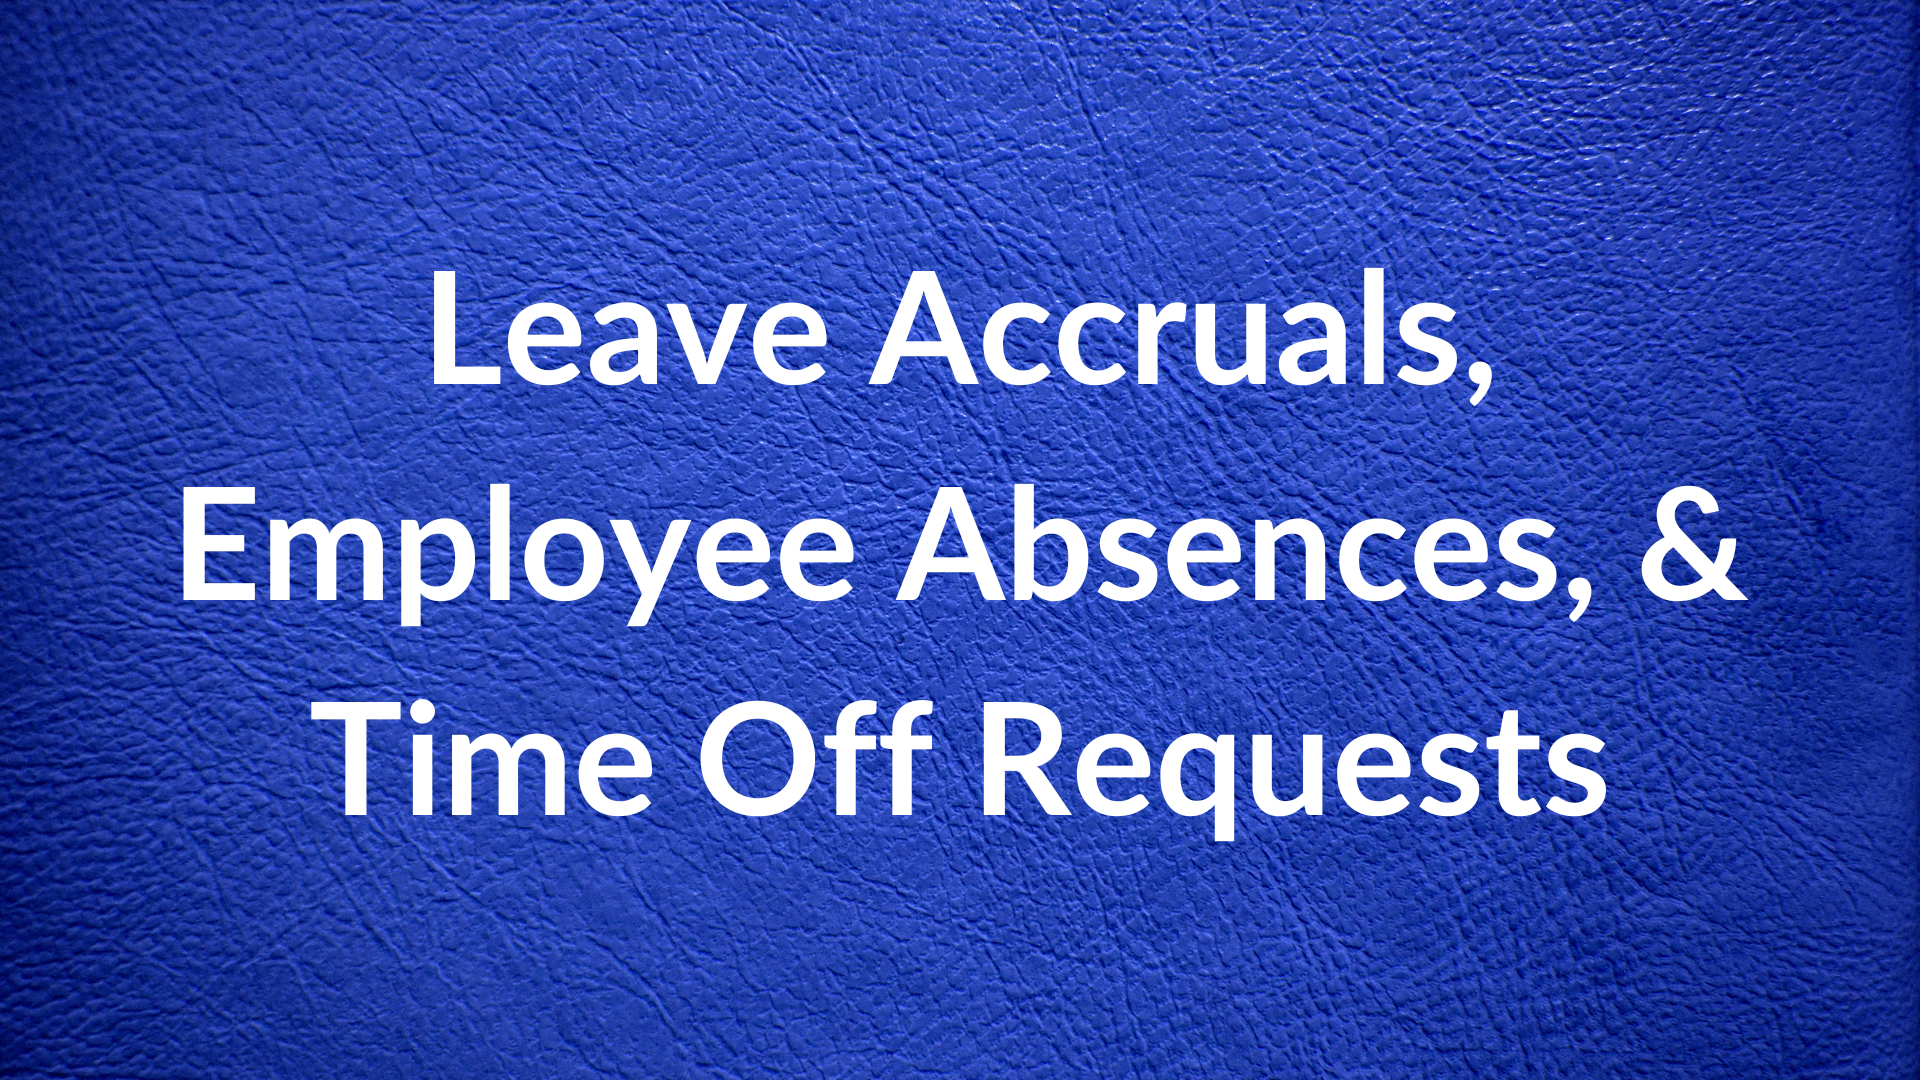 Leave Accruals, Employee Absences, & Time Off Requests